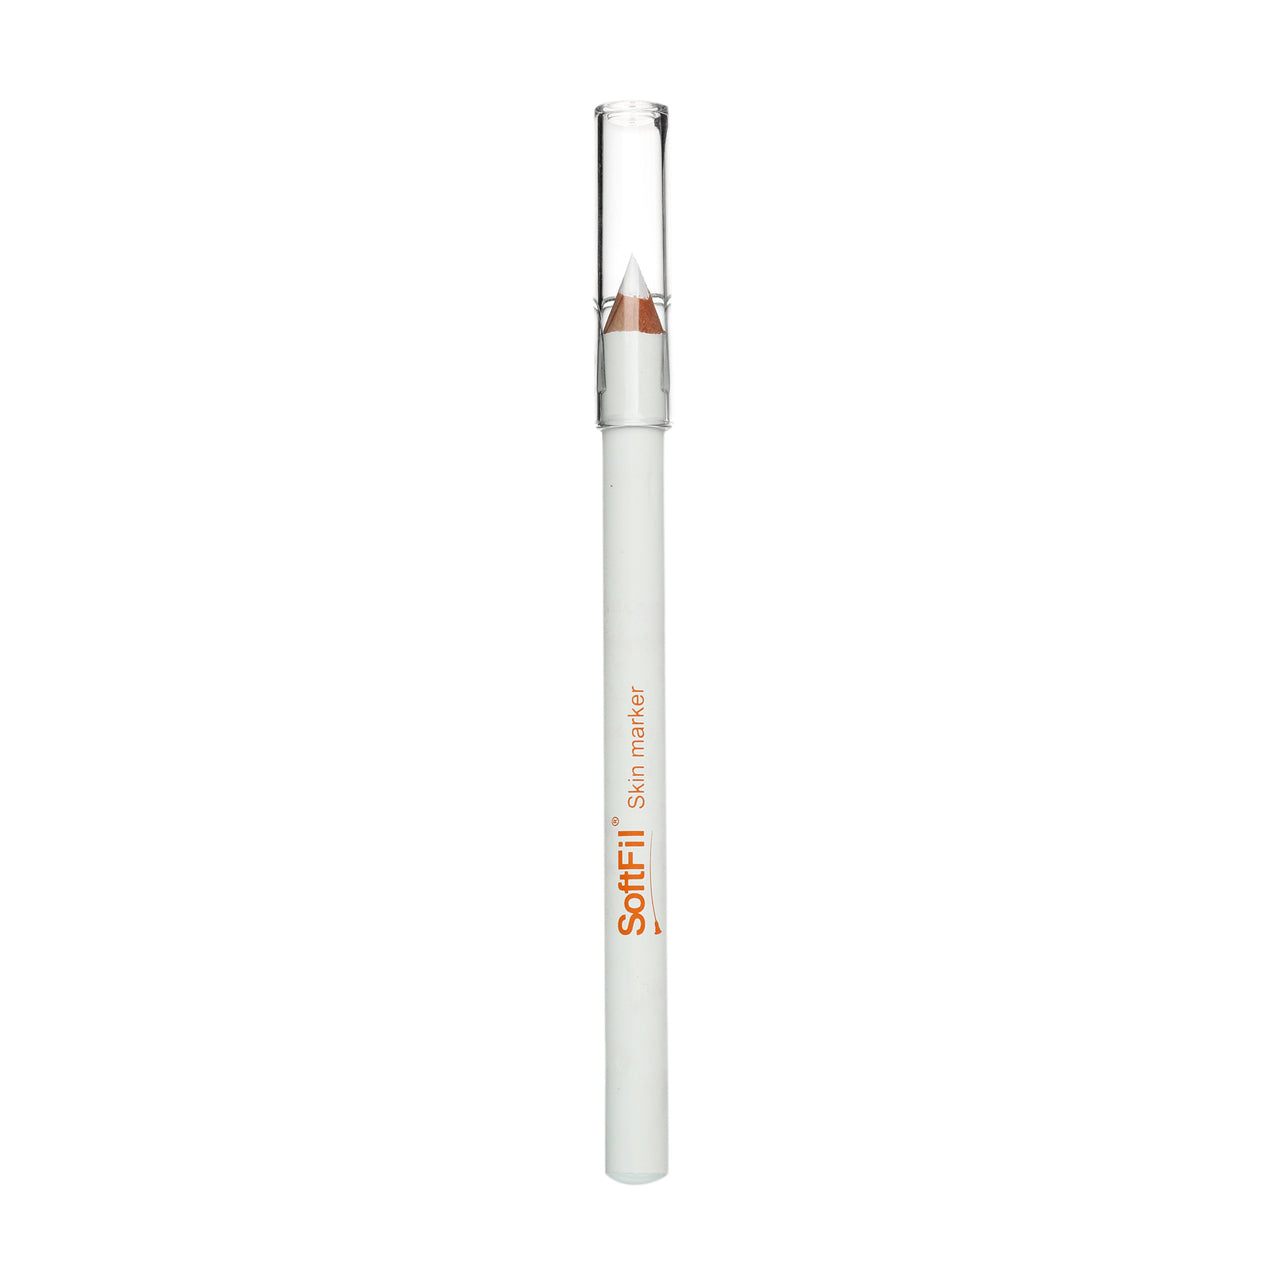 Aesthetic Skin Marker for Injectables